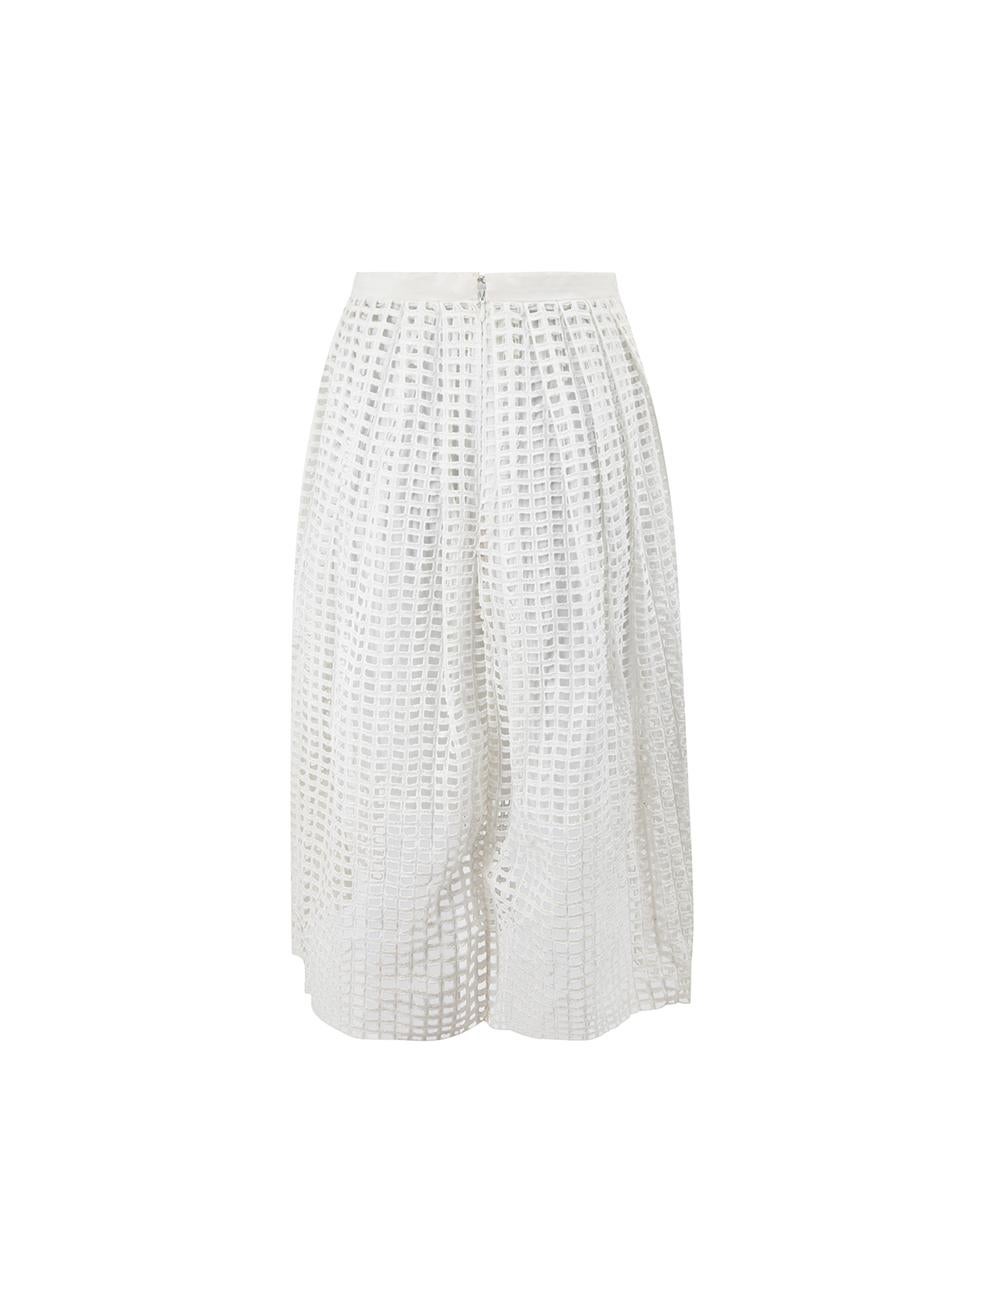 White Laser Cut Overlay Midi Skirt Size S In Good Condition For Sale In London, GB